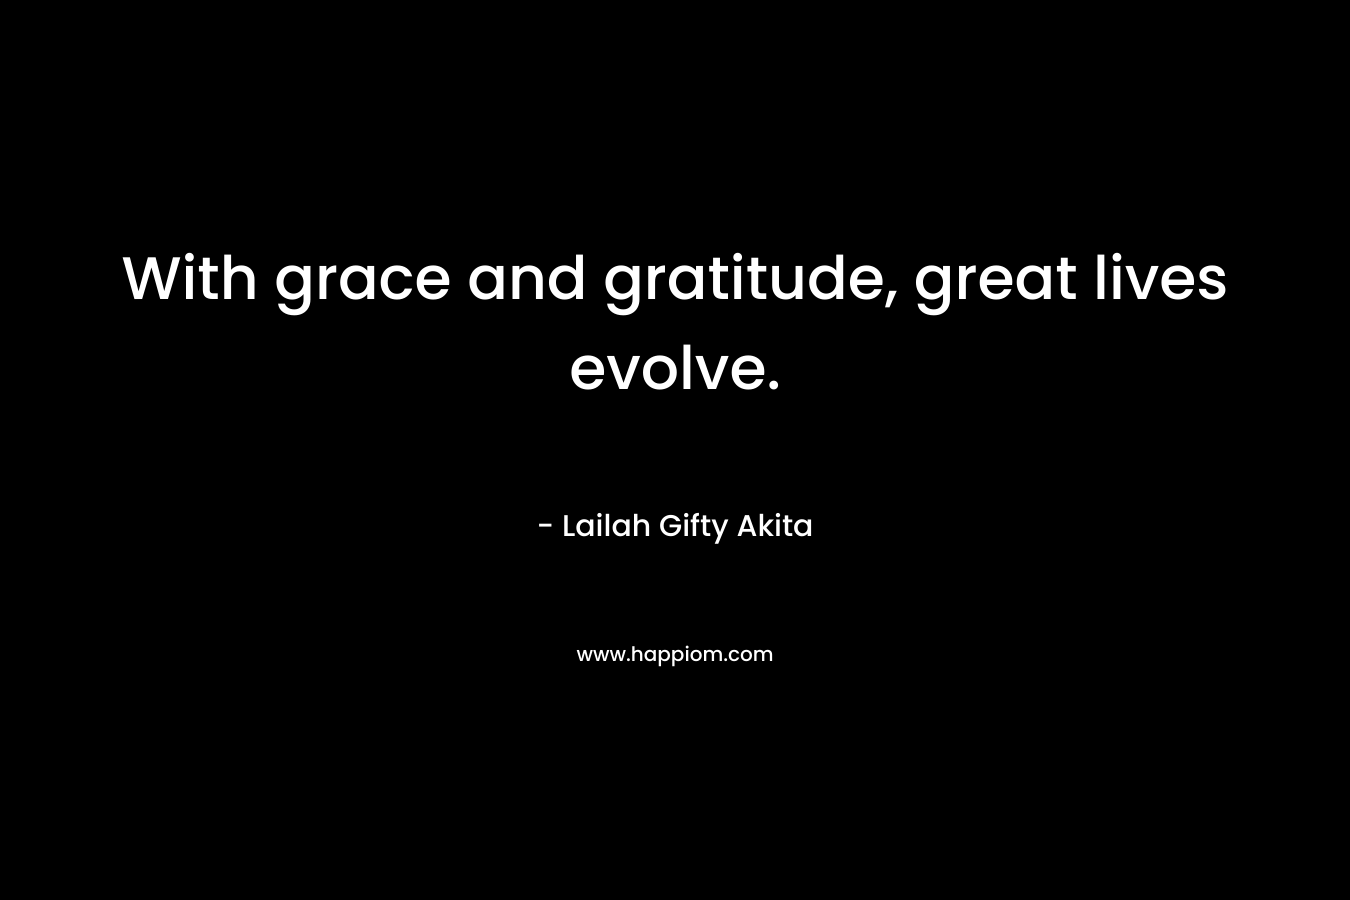 With grace and gratitude, great lives evolve.